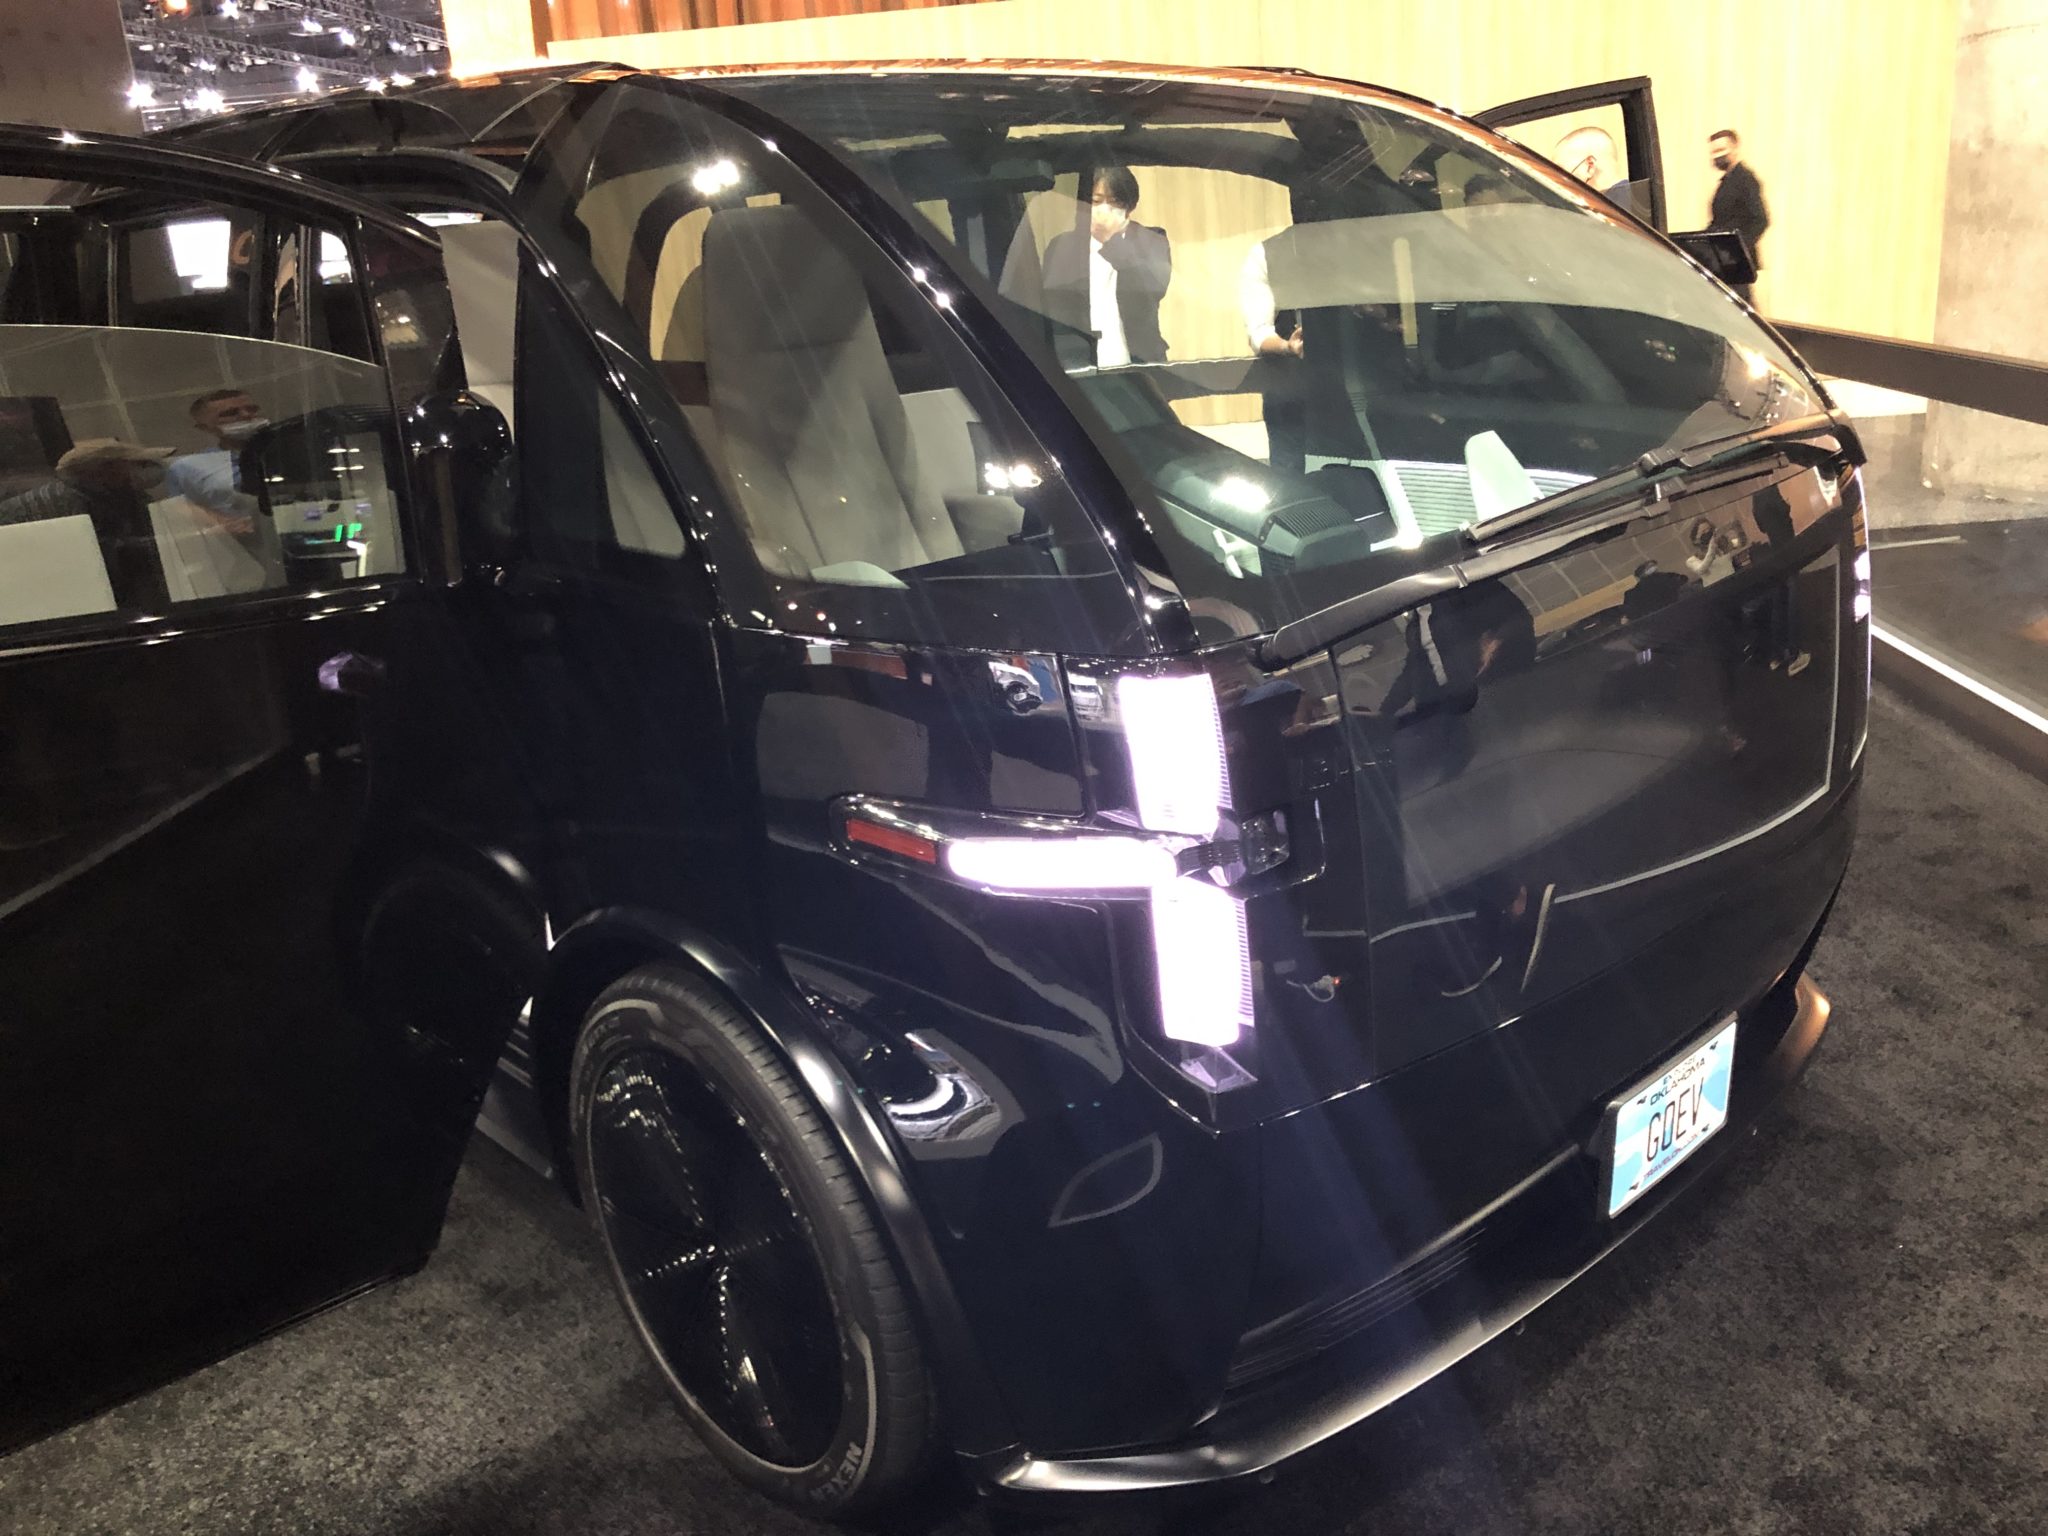 The Canoo concept family vehicle debued at the LA Auto Show.